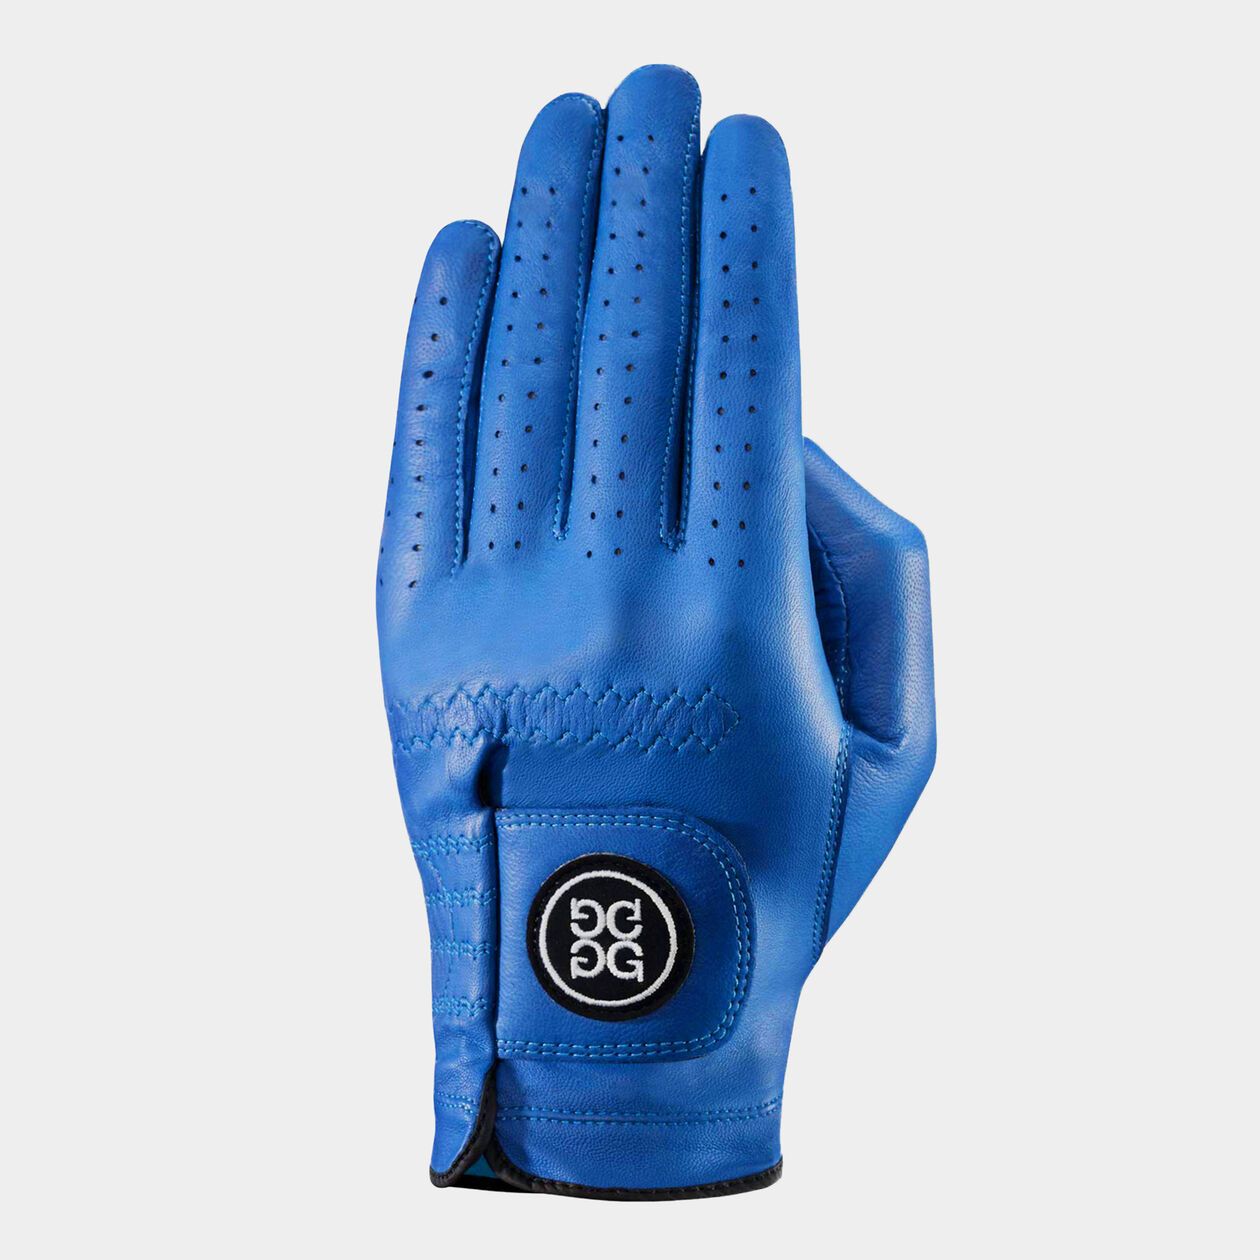 MEN'S COLLECTION GOLF GLOVE – G/FORE | G/FORE | GFORE.com